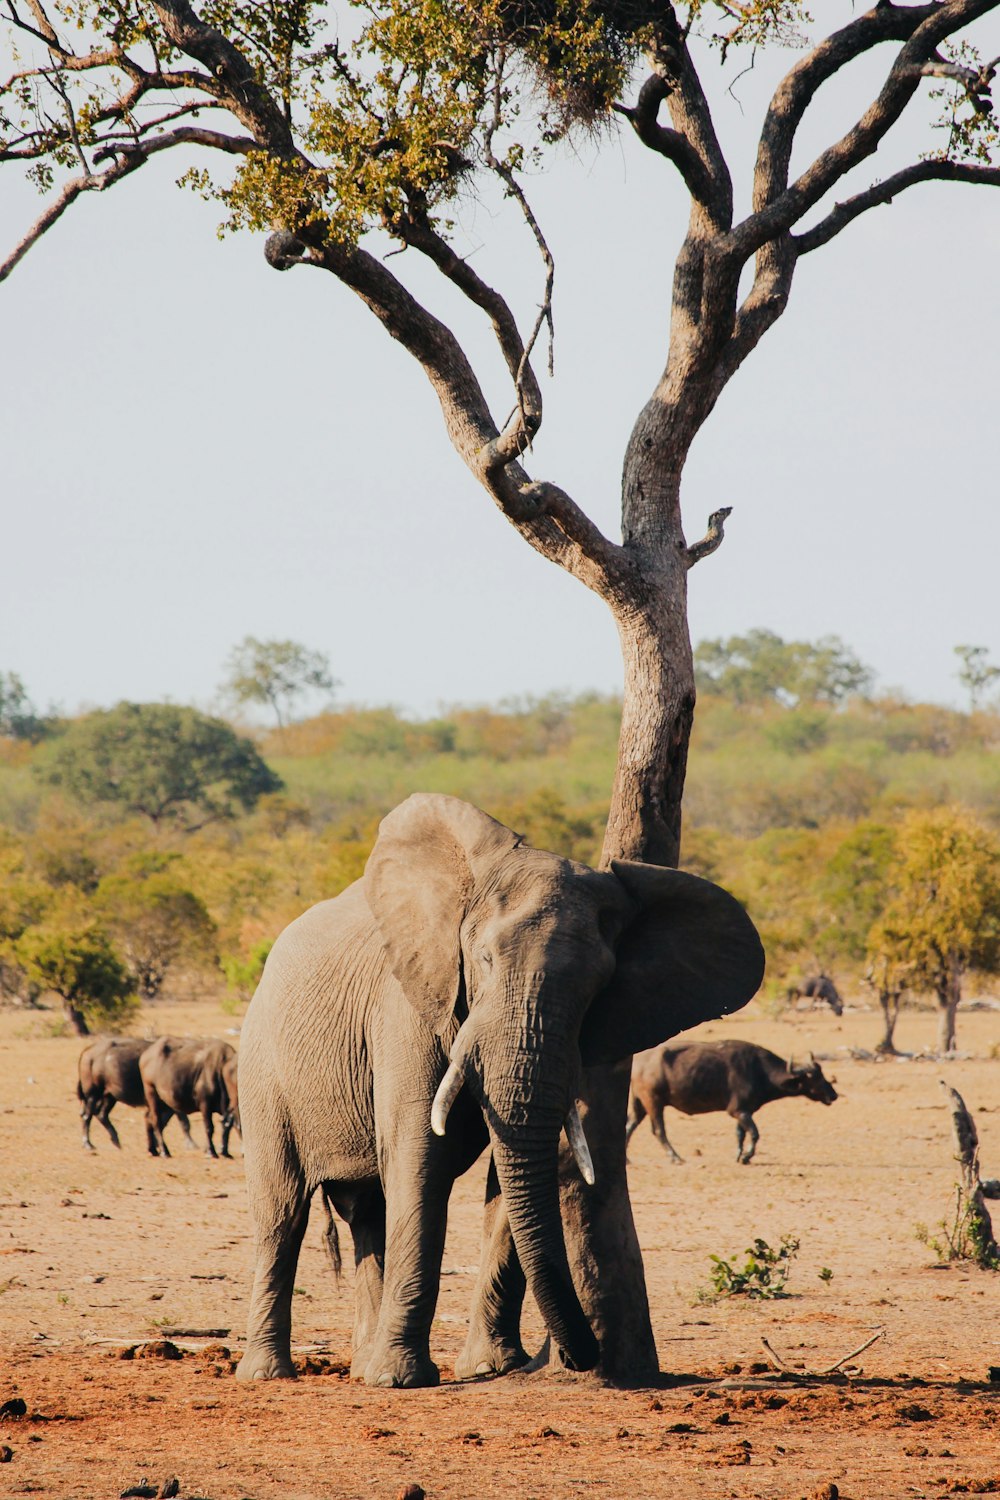 a large elephant standing next to a tree